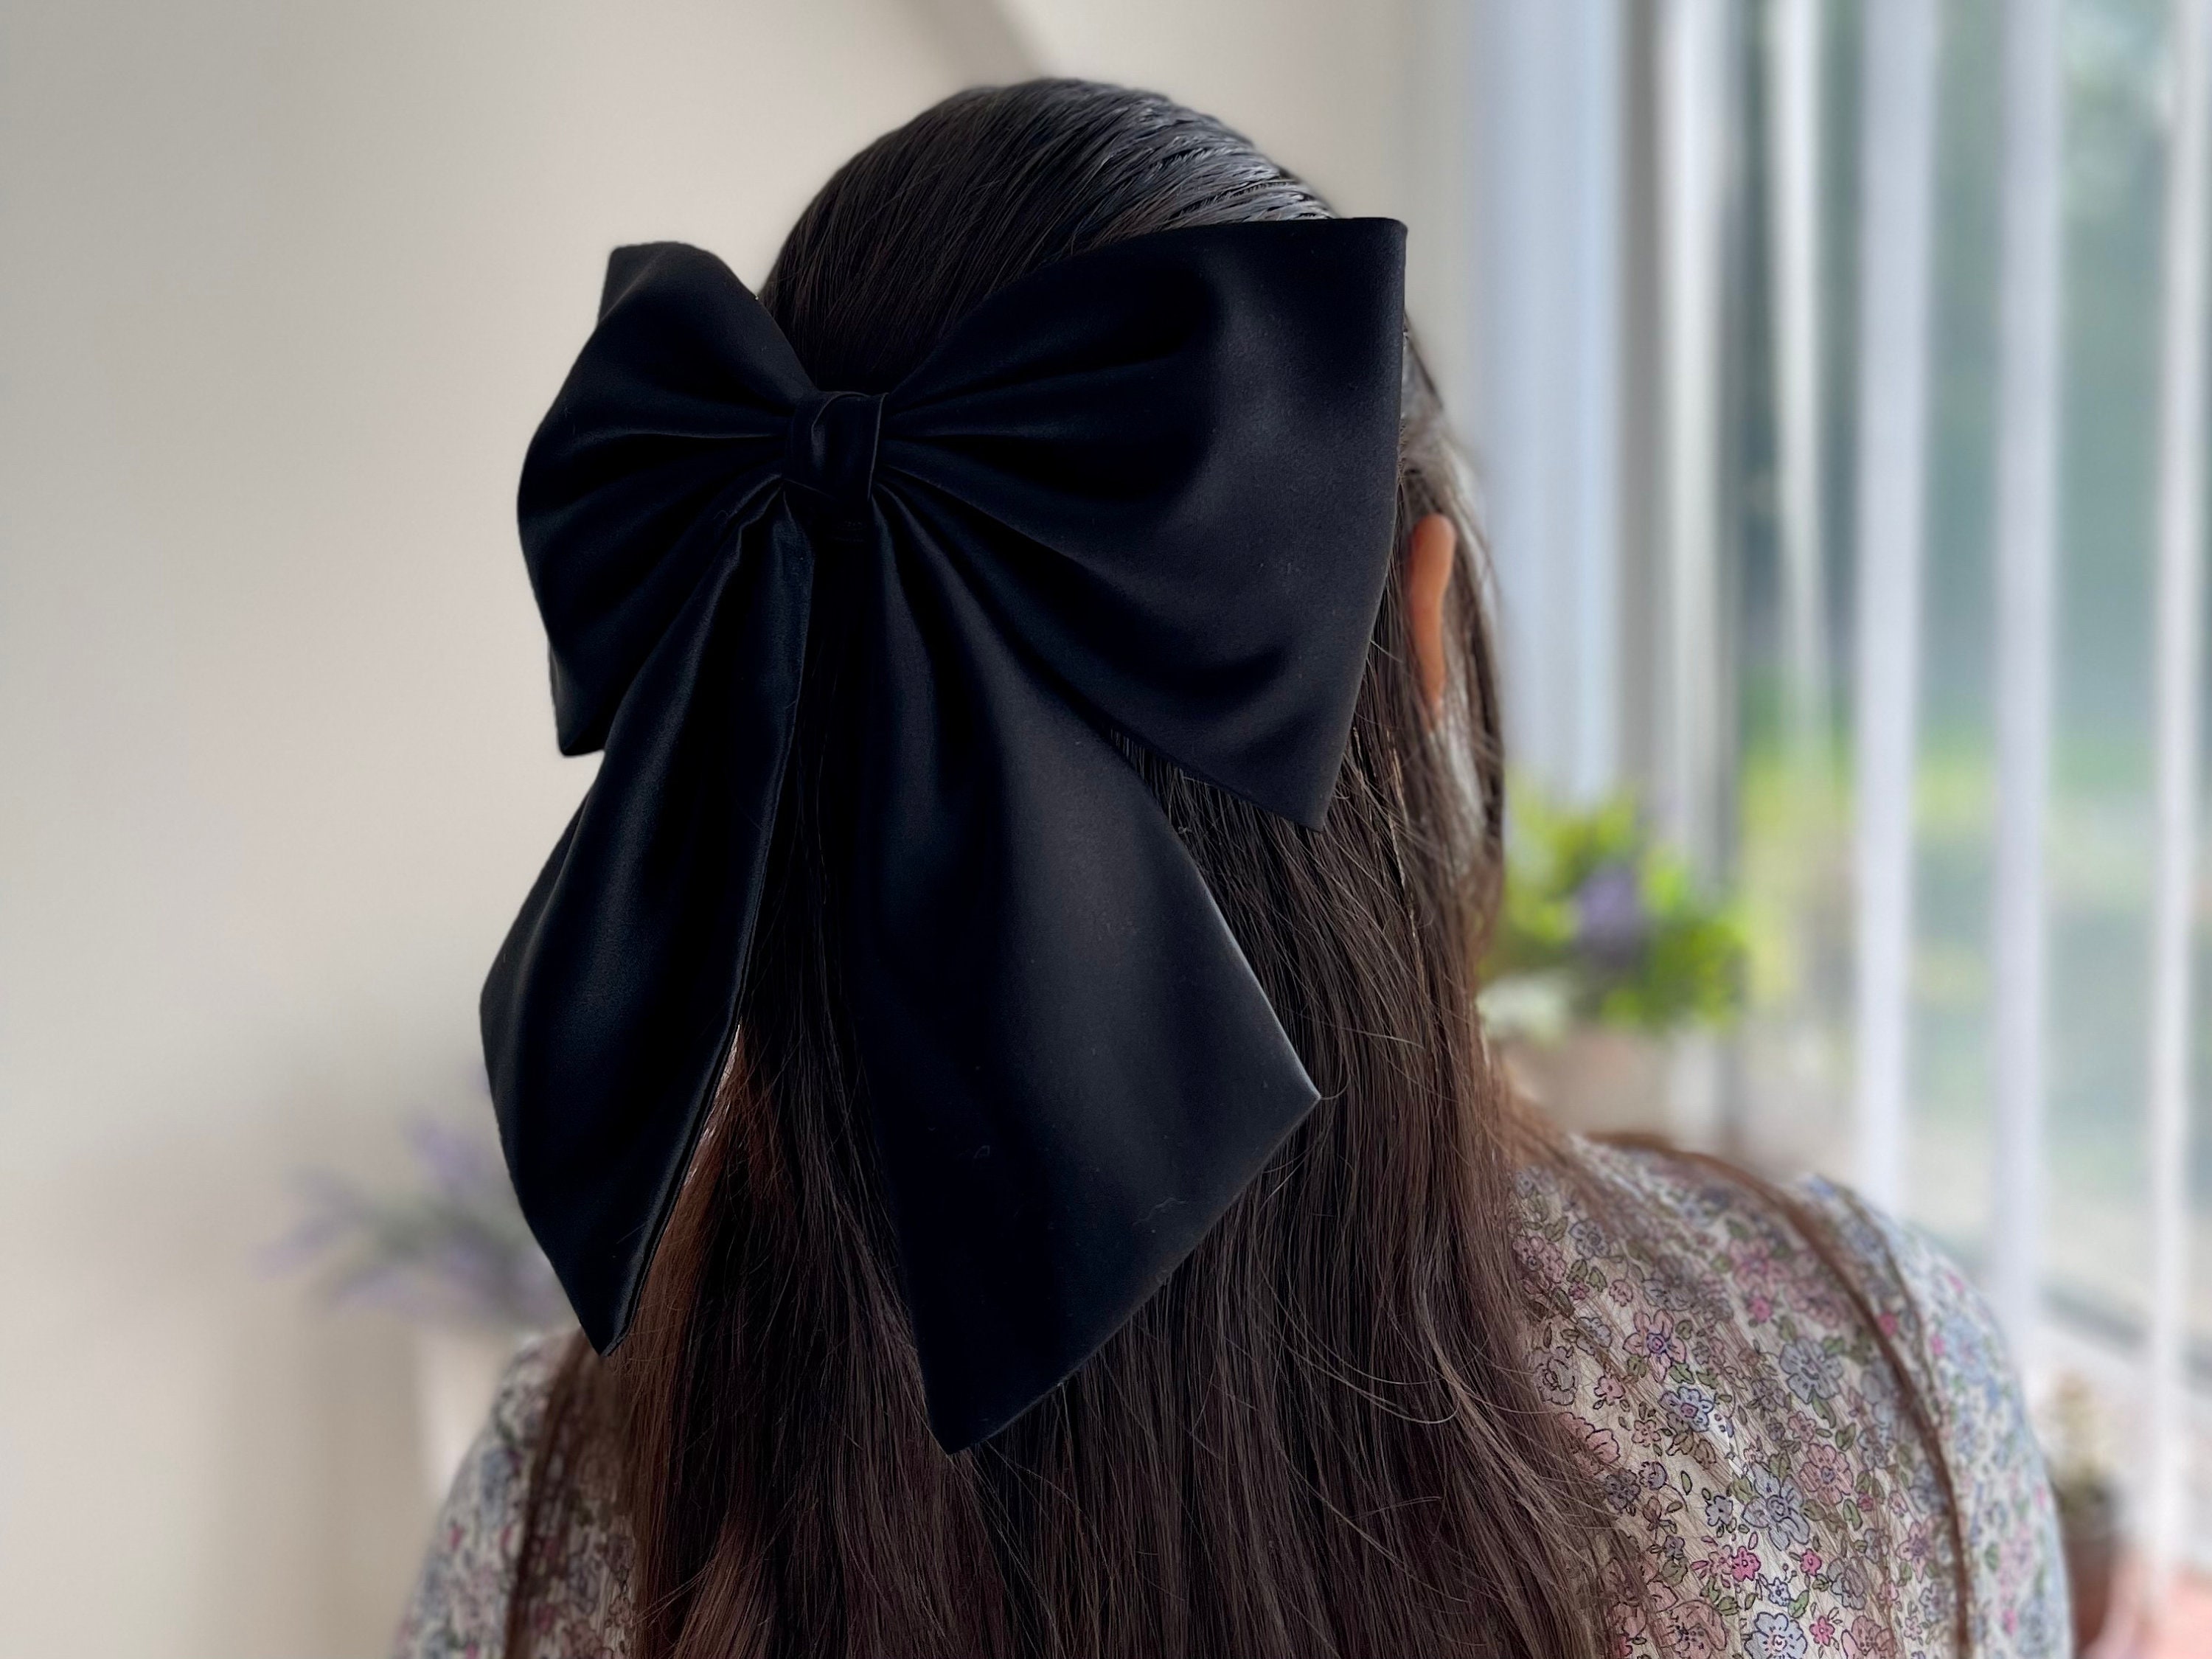 Black Big Satin Bow Large Hair Bow for Party Oversized Bow With Tail Giant  Bow With Barrette Black Bow Hair Accessories for Girls Hen Party 